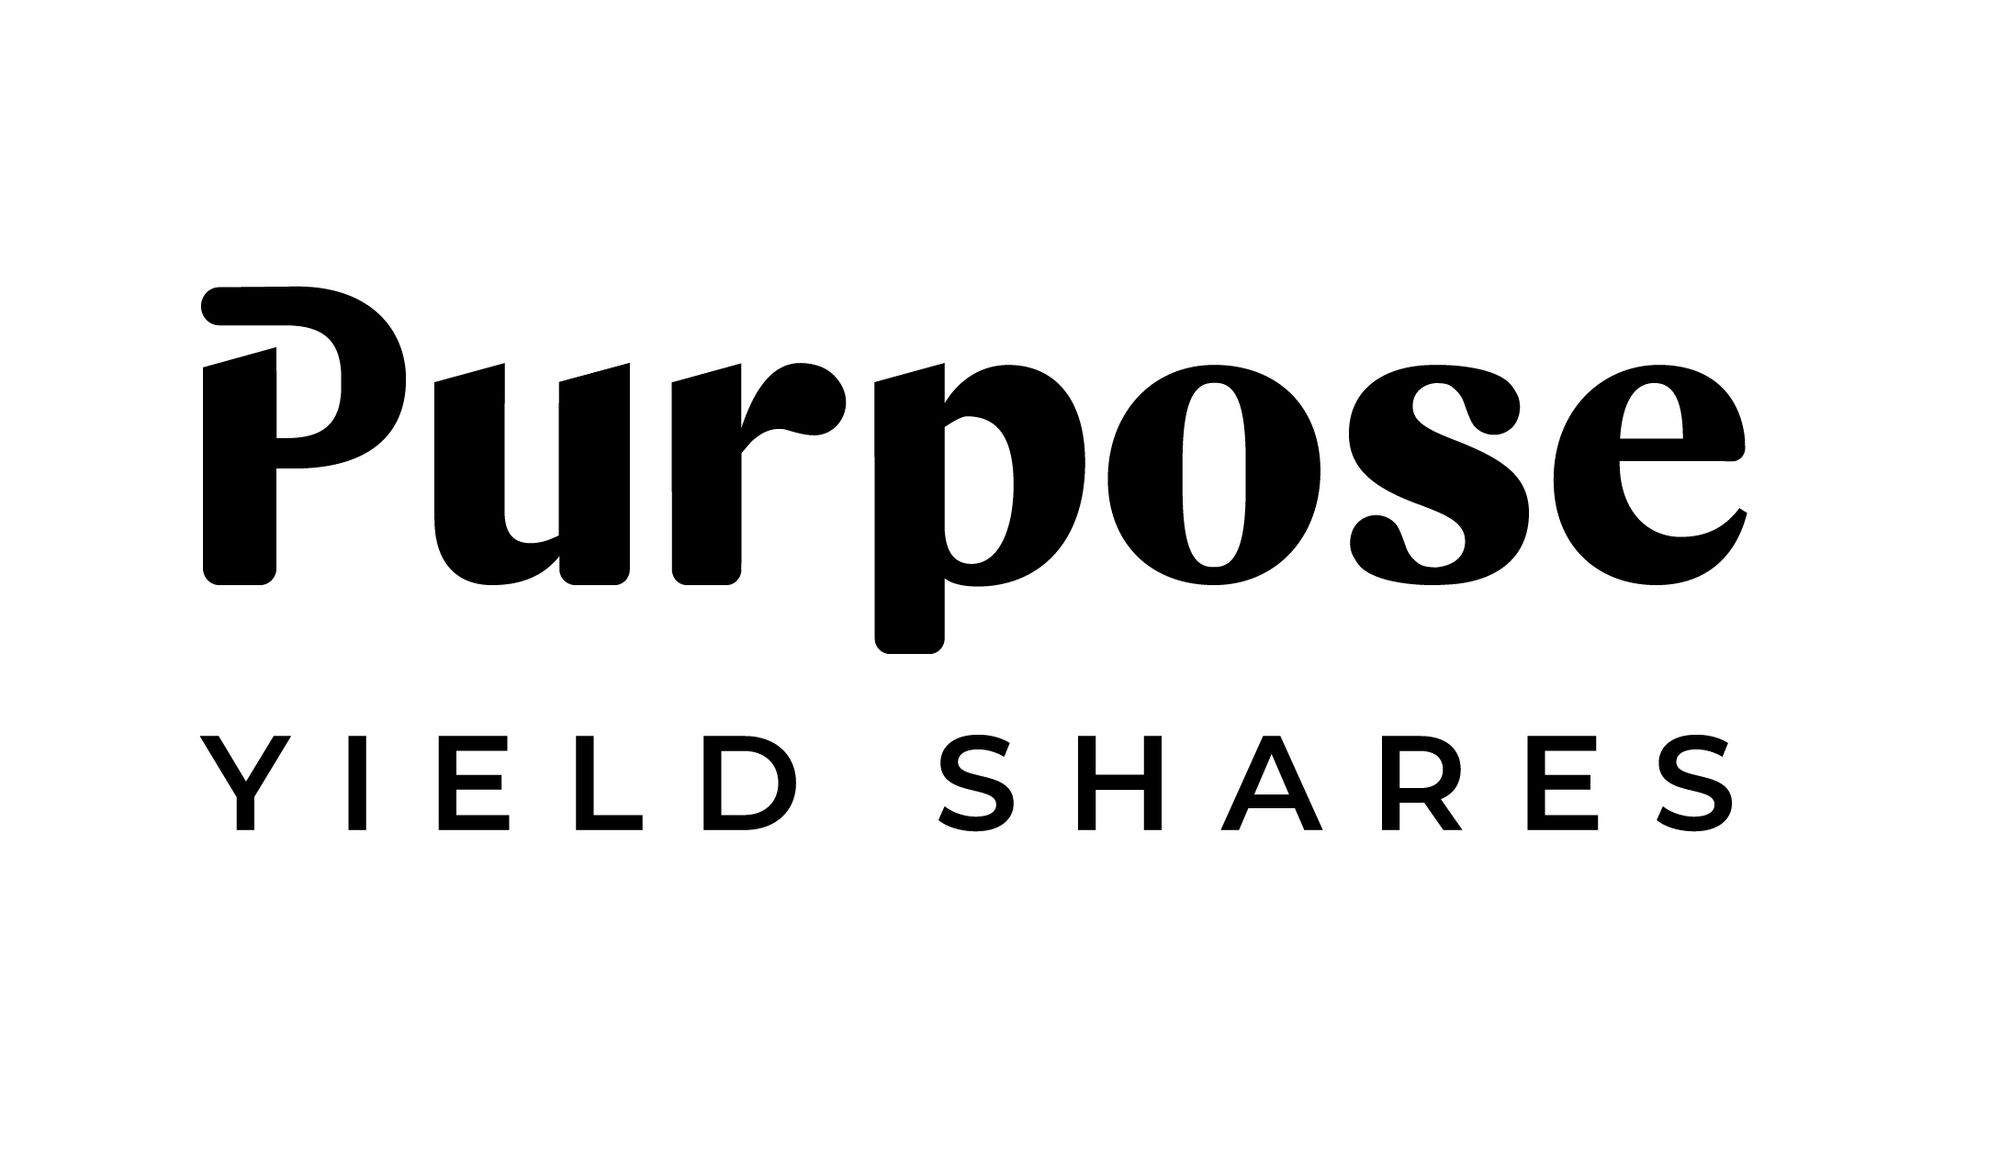 Purpose Investments Files Preliminary Prospectus for the First Yield-Focused Single-Stock ETFs